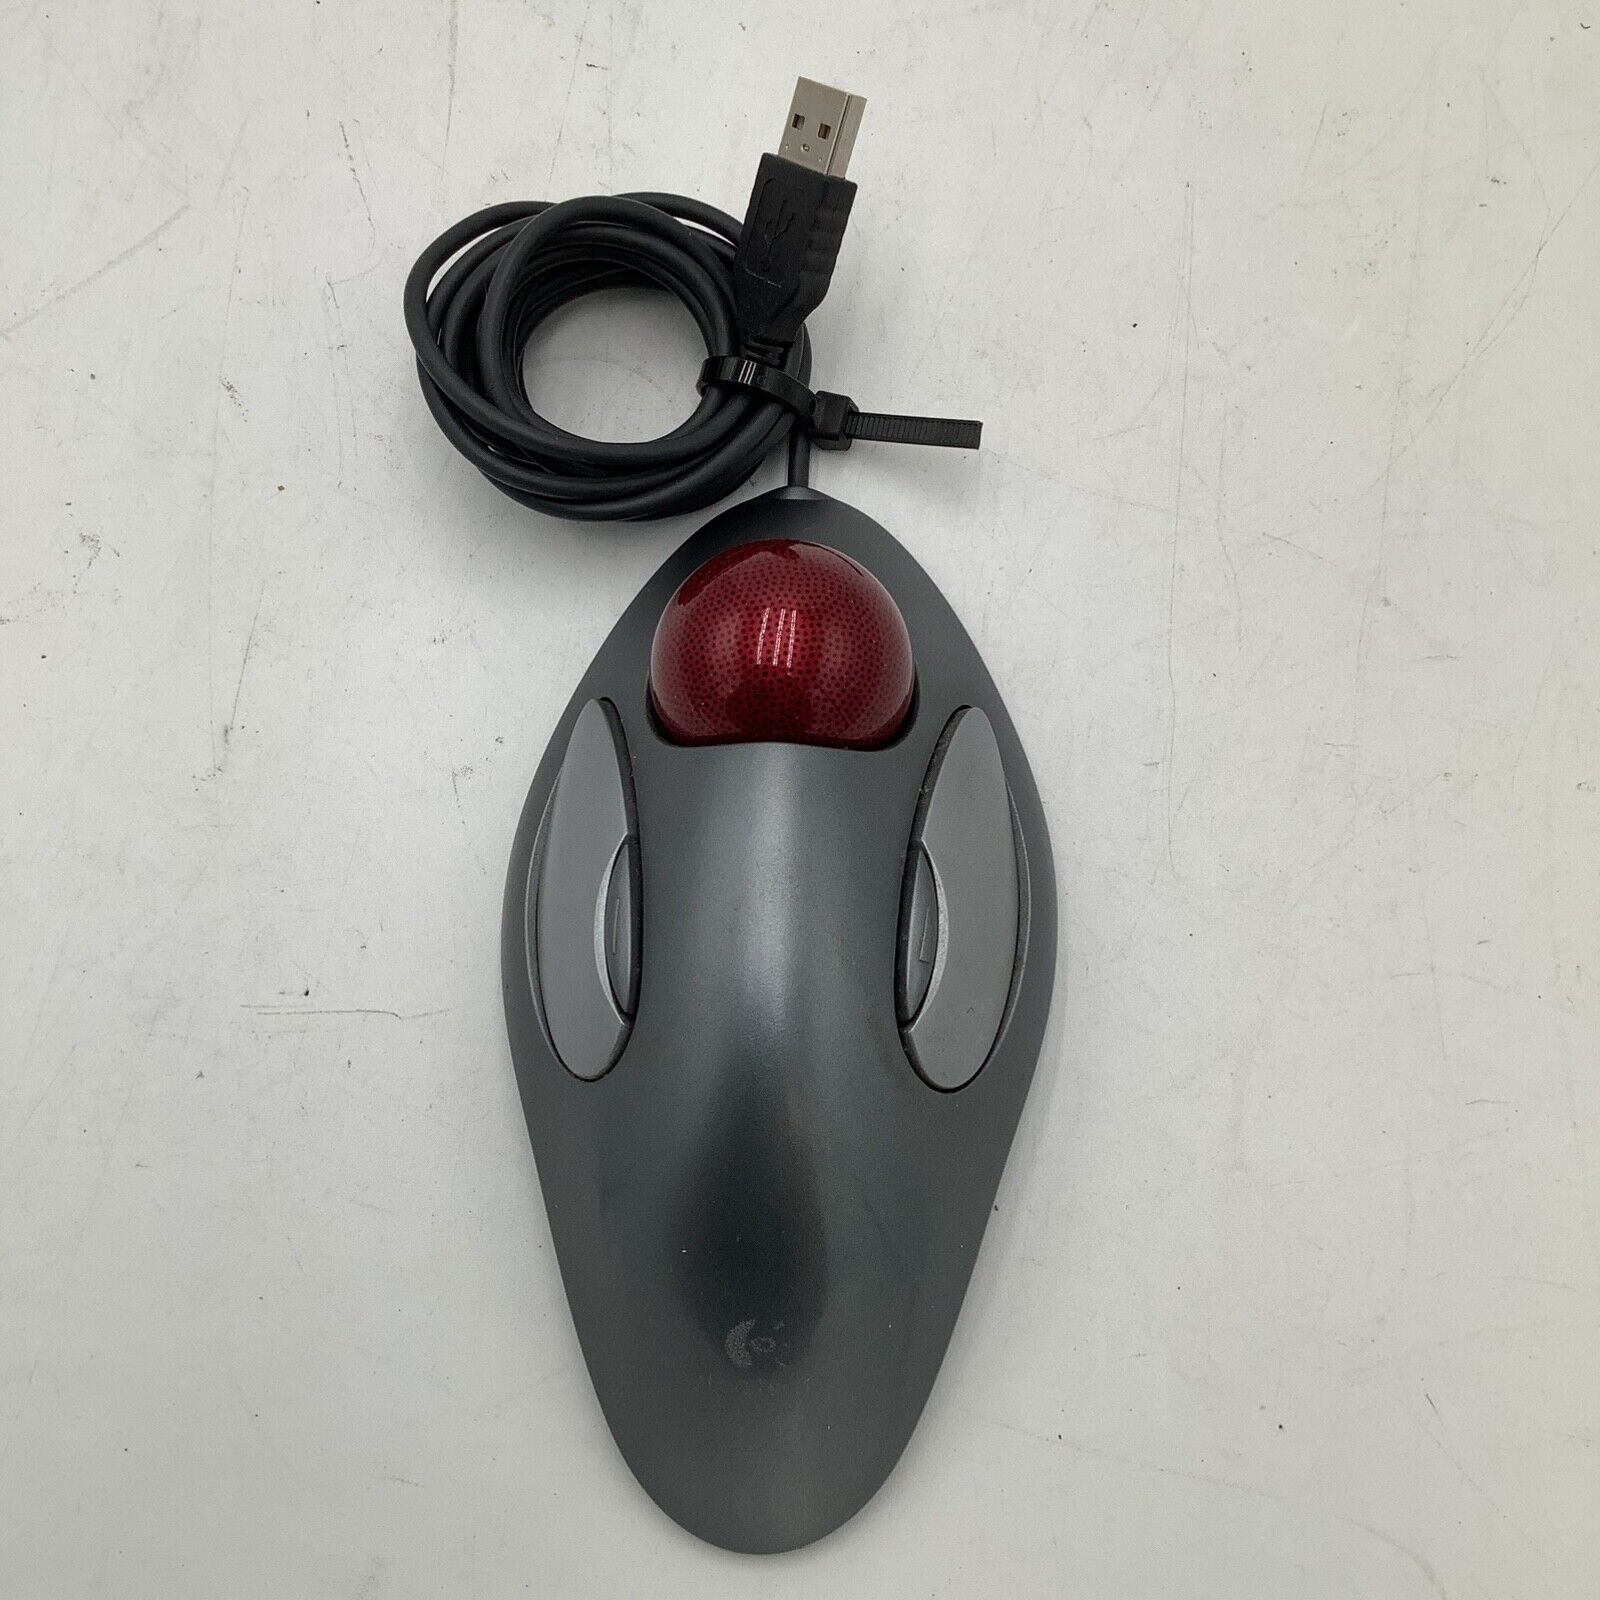 Logitech Trackman Trackball PC Mouse Gray With Red Ball Wired T-BC21 810-000767